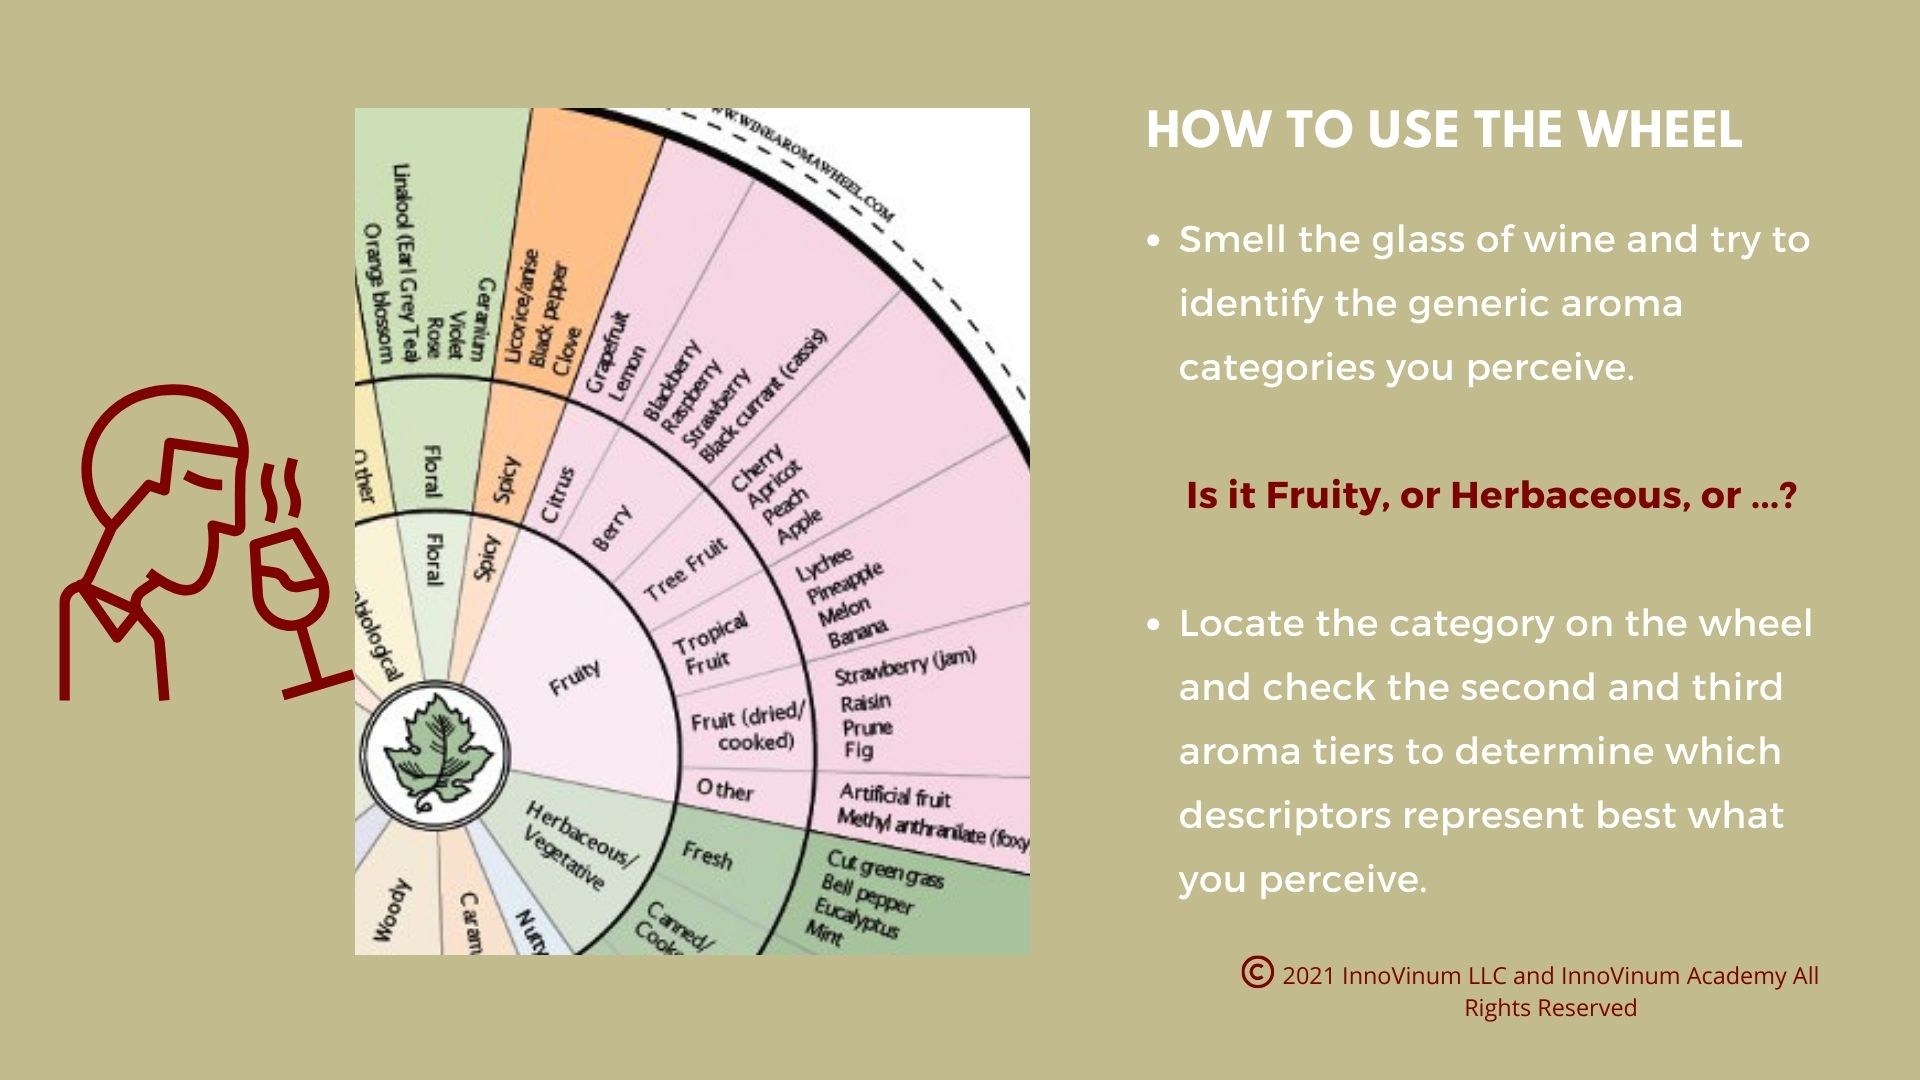 A figure showing how to use the wine aroma wheel by smelling the glass of wine and looking at the aroma categories on the wheel.